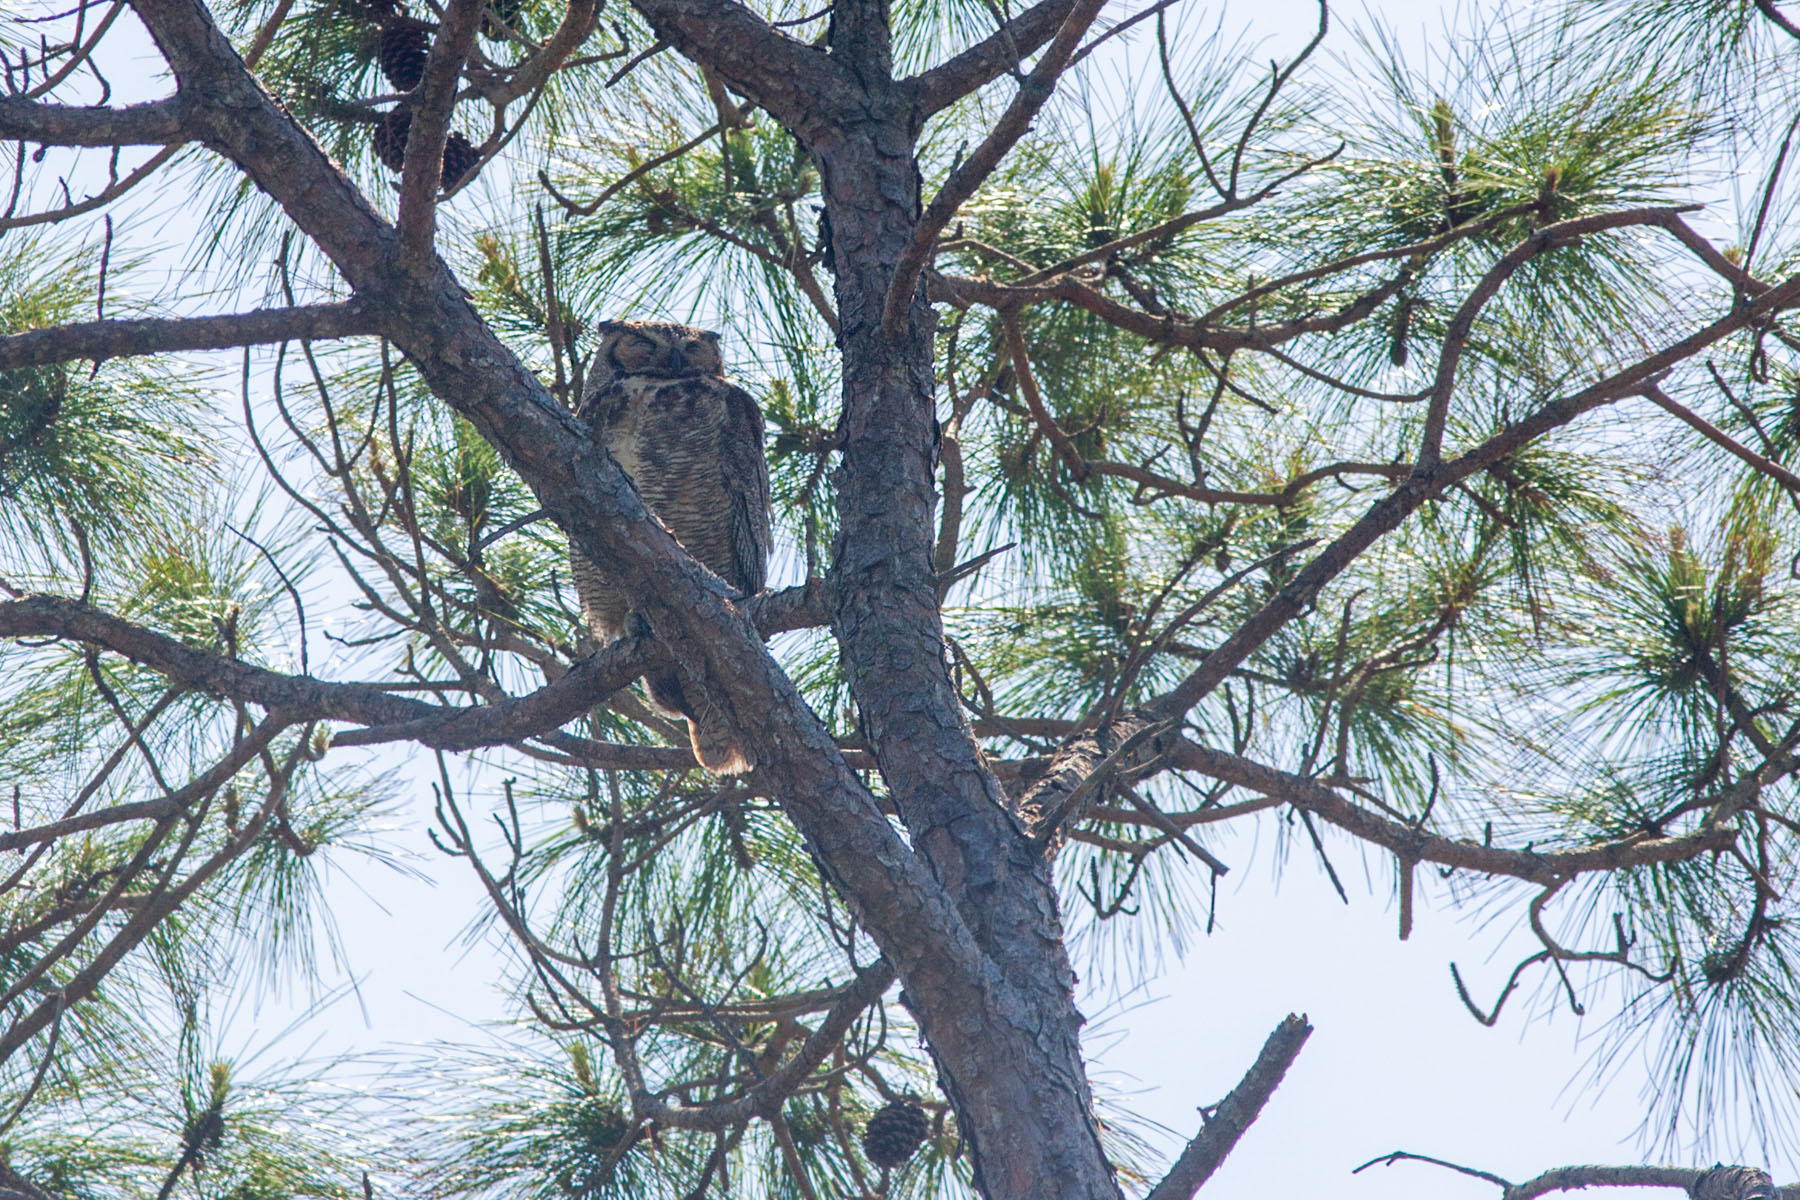 Great Horned Owl watching its nest, Honeymoon Island, Florida.  Click for next photo.